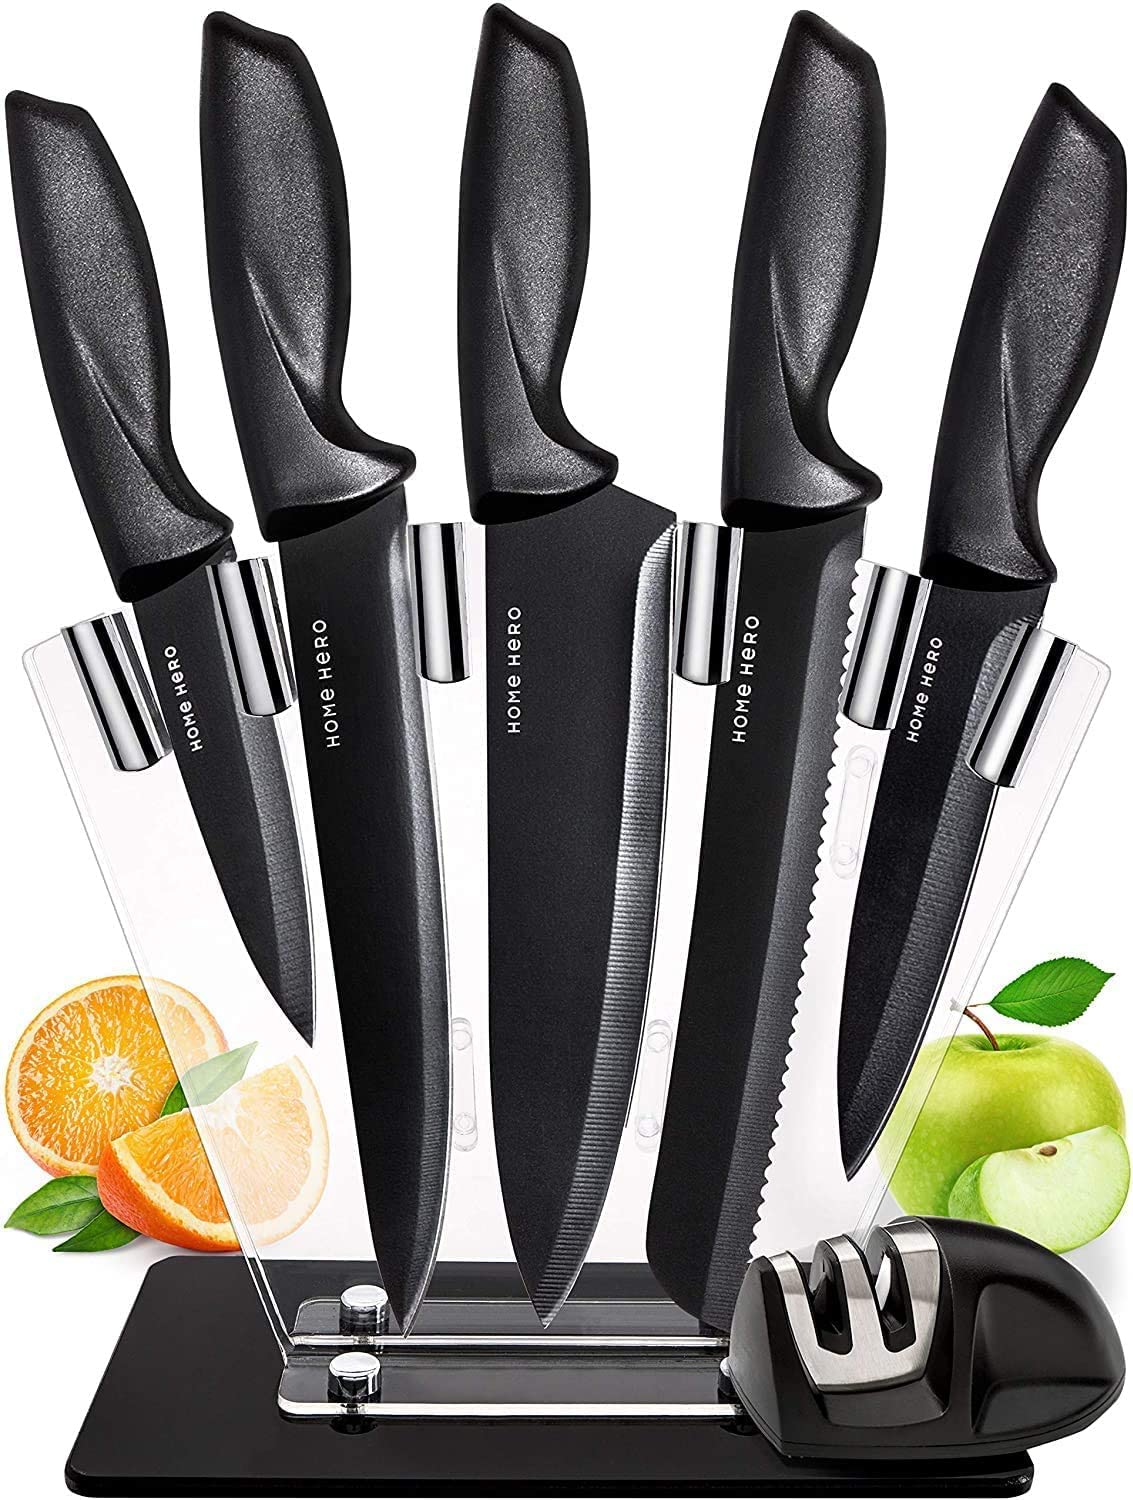 Best sharp knives with set of five